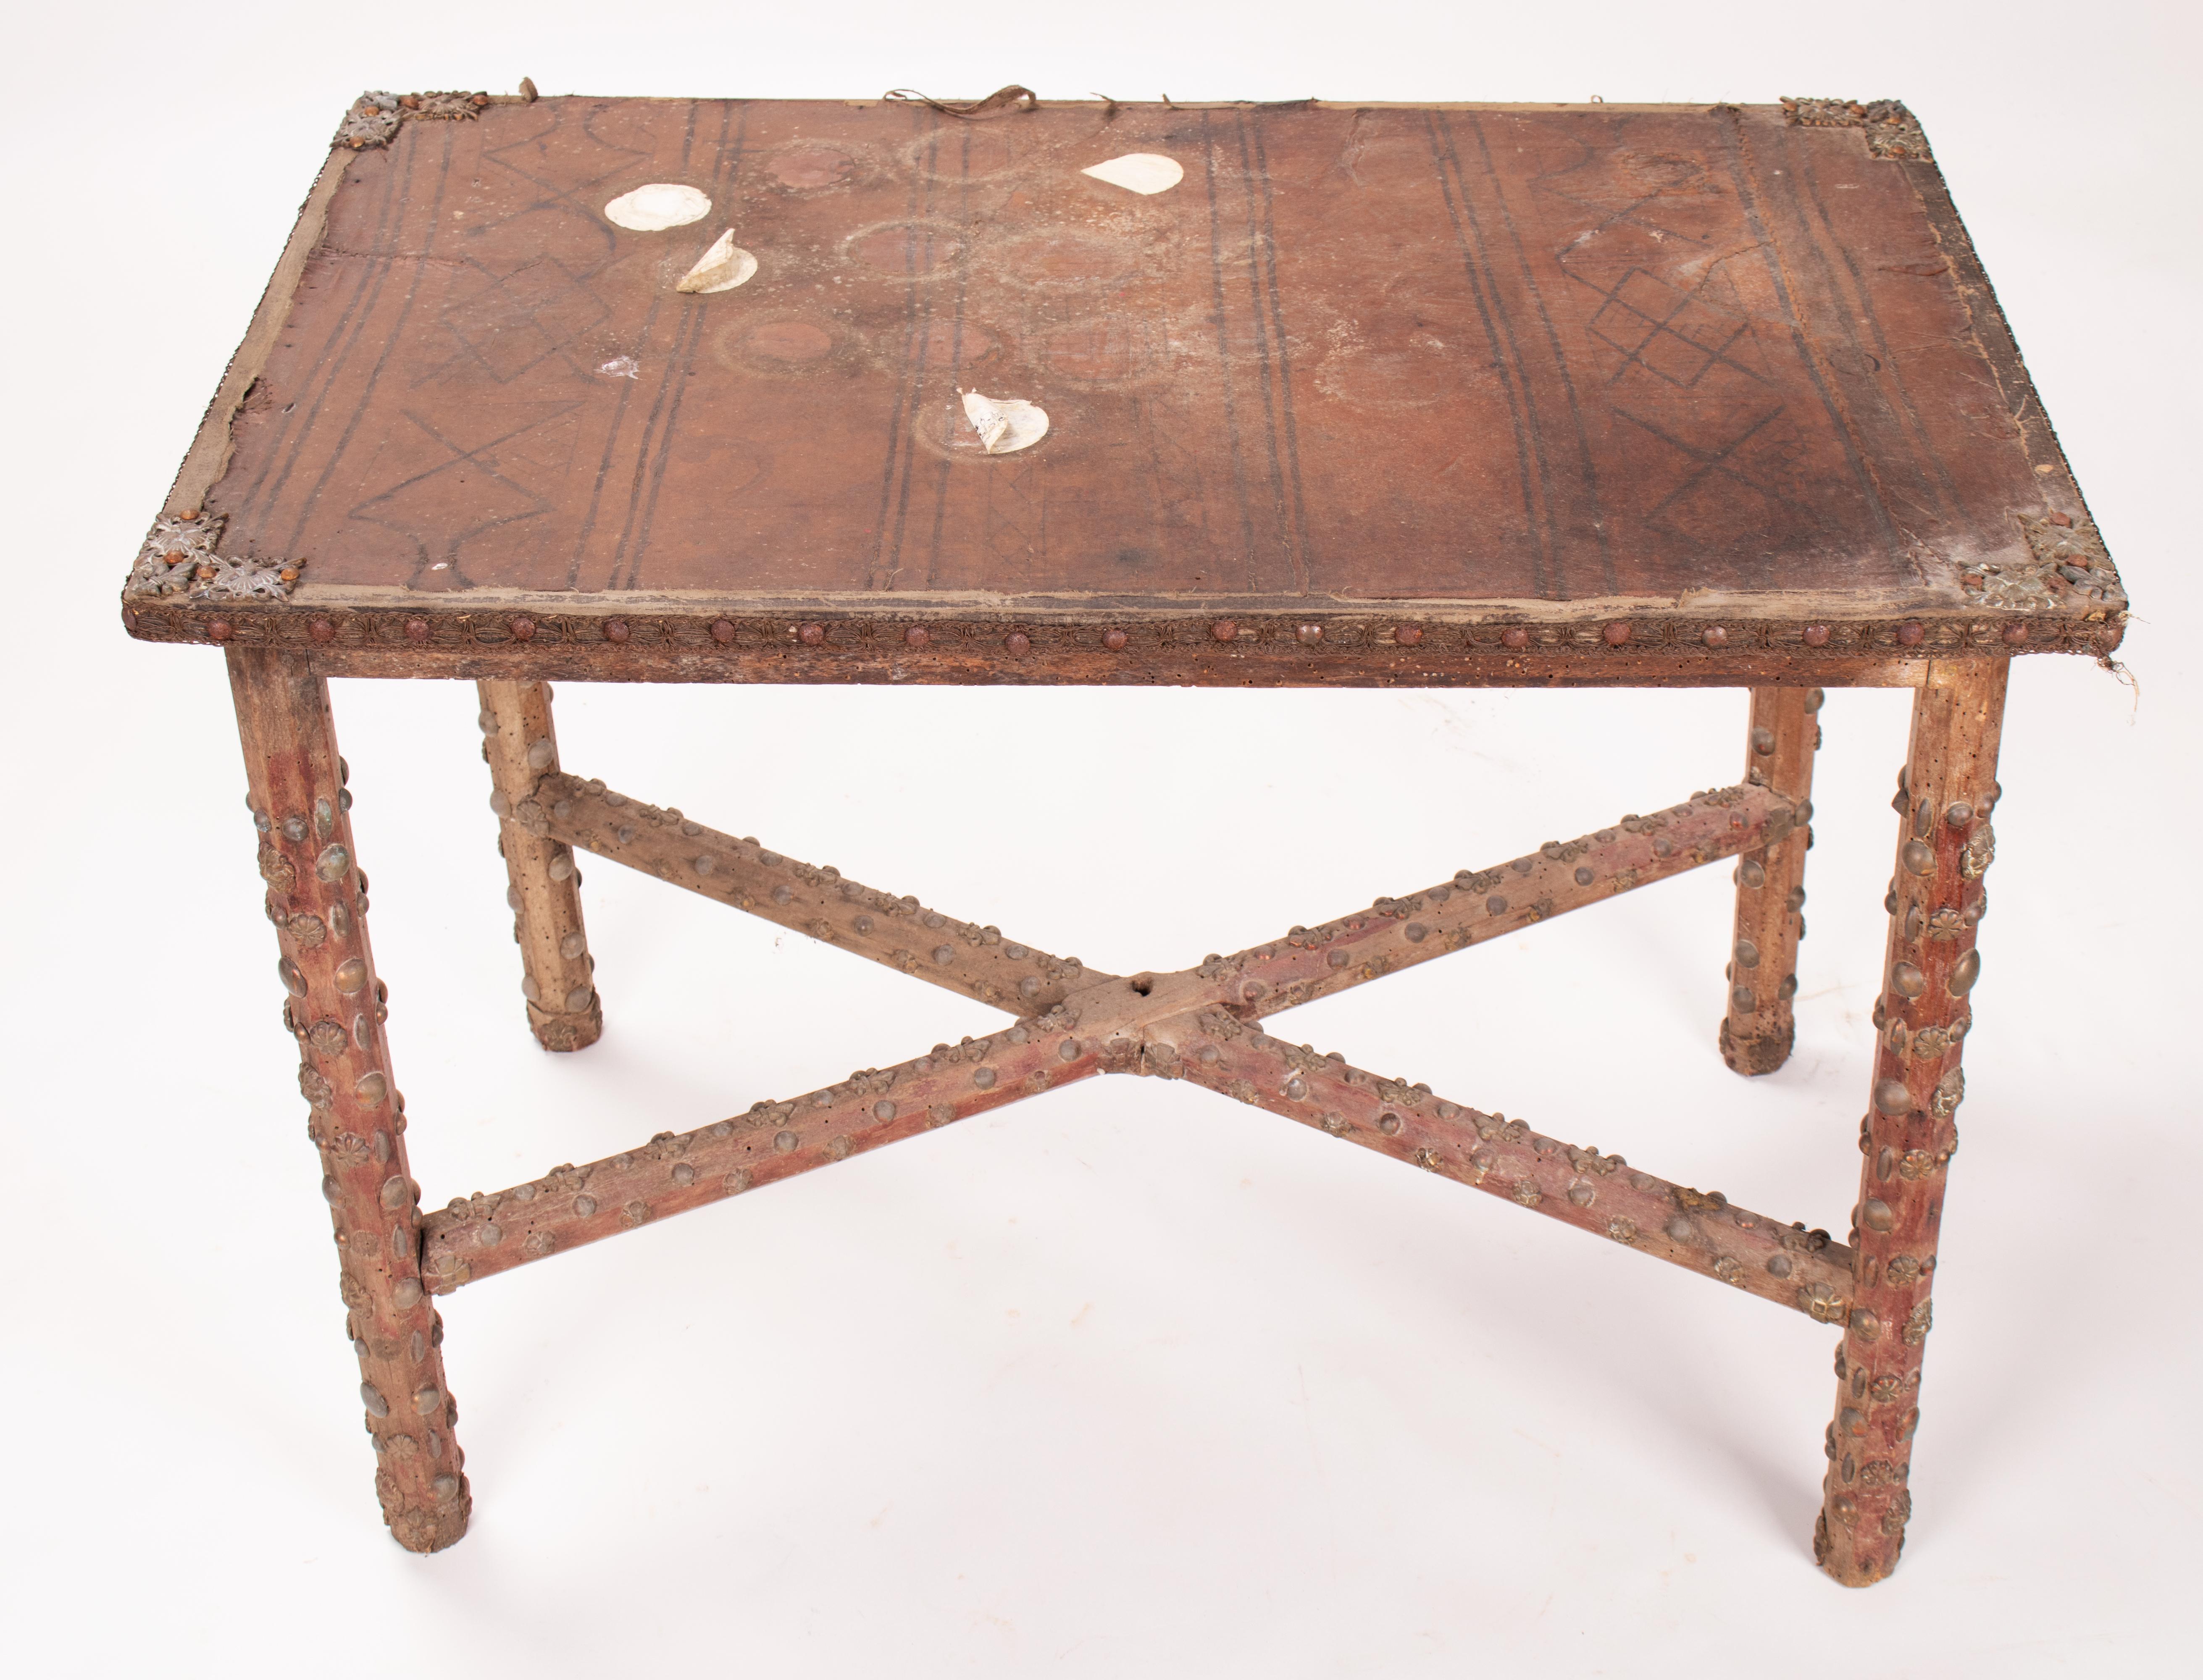 19th Century French Leather Top Wooden Table with Fleur-de-lis Nailhead Trim For Sale 4